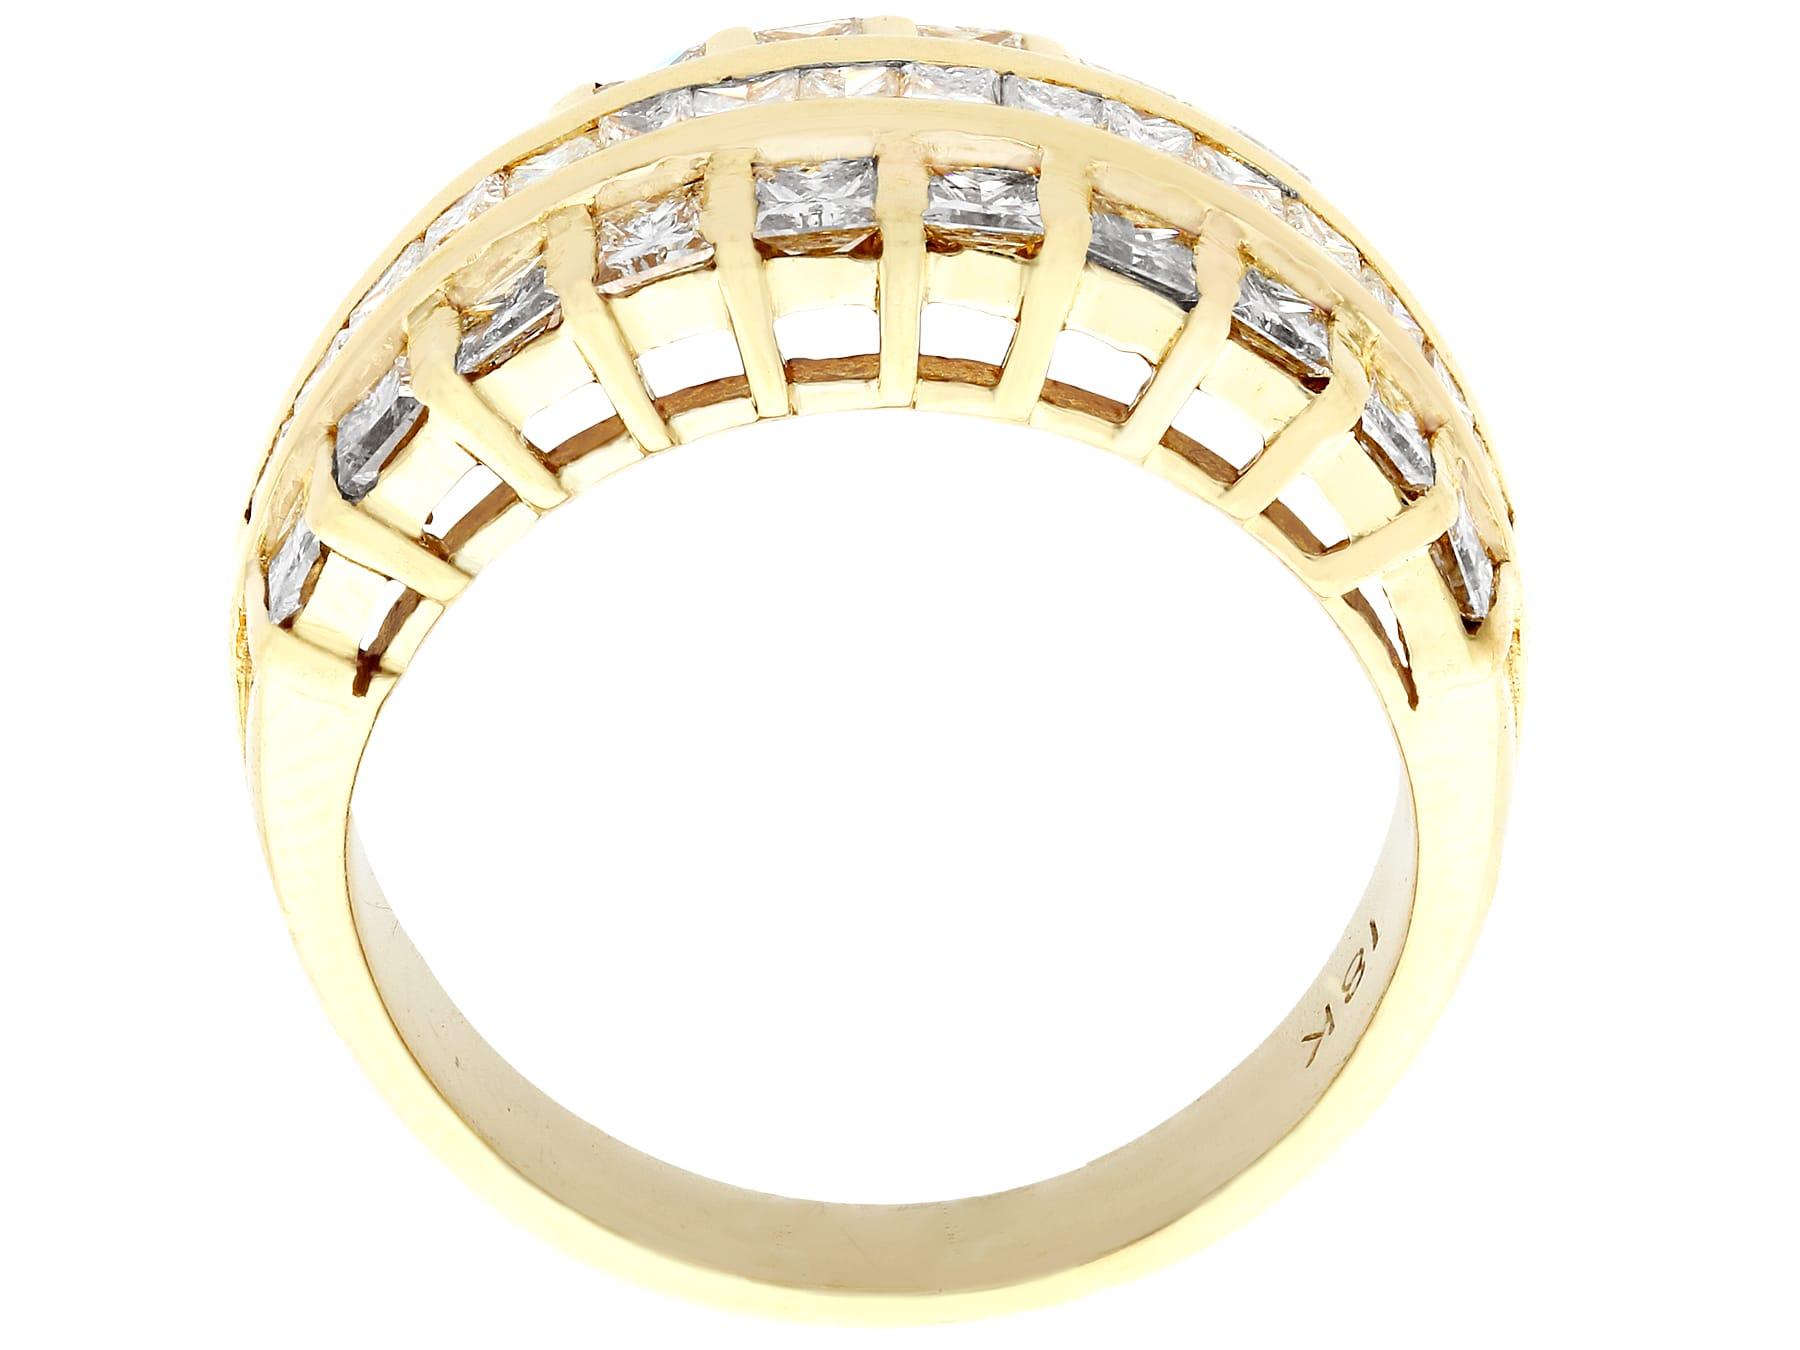 1990s 1.54 Carat Diamond Yellow Gold Cocktail Ring In Excellent Condition For Sale In Jesmond, Newcastle Upon Tyne